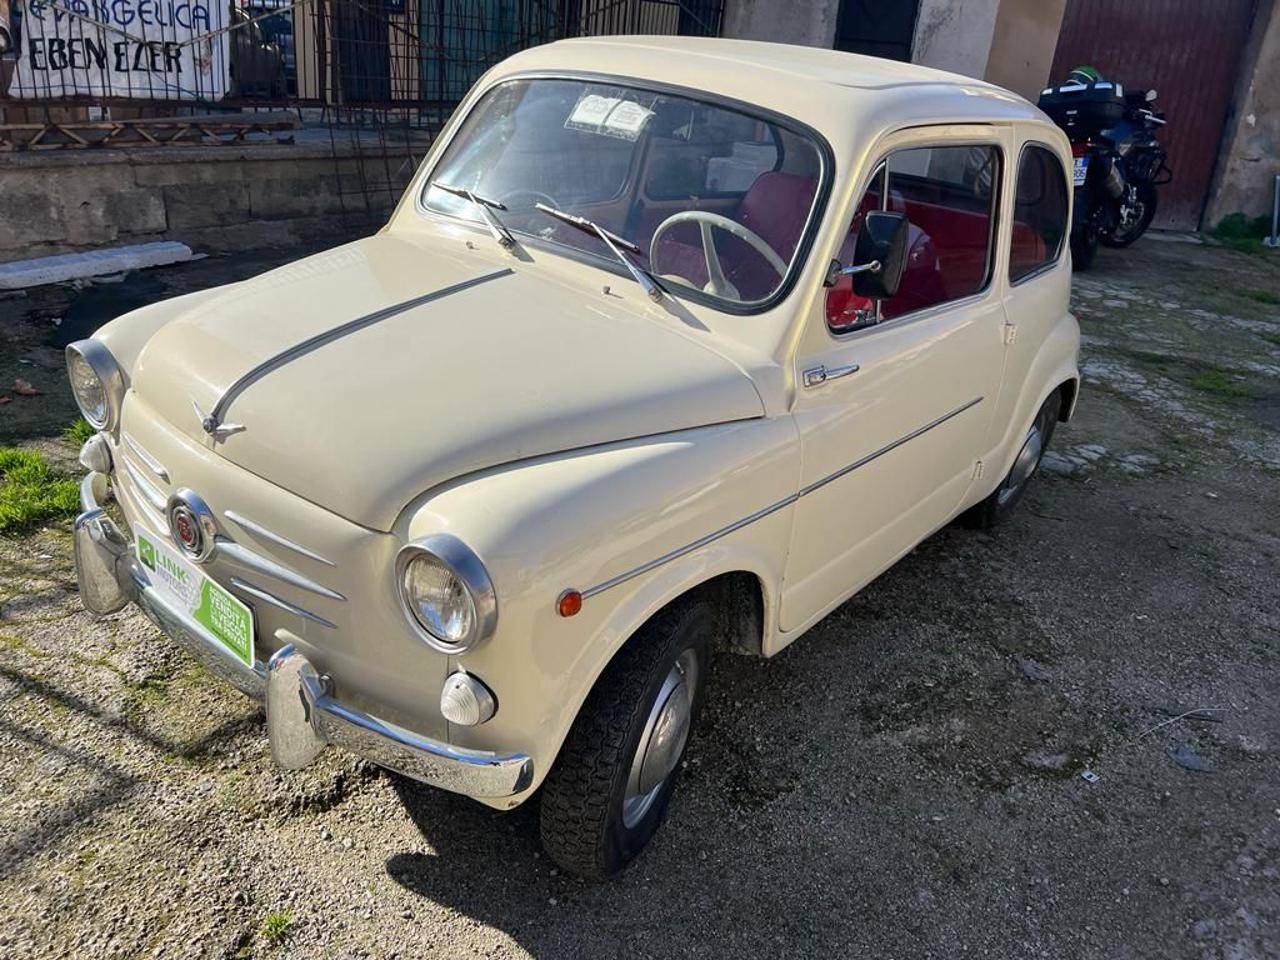 For Sale: FIAT 600 D (1960) offered for €6,900